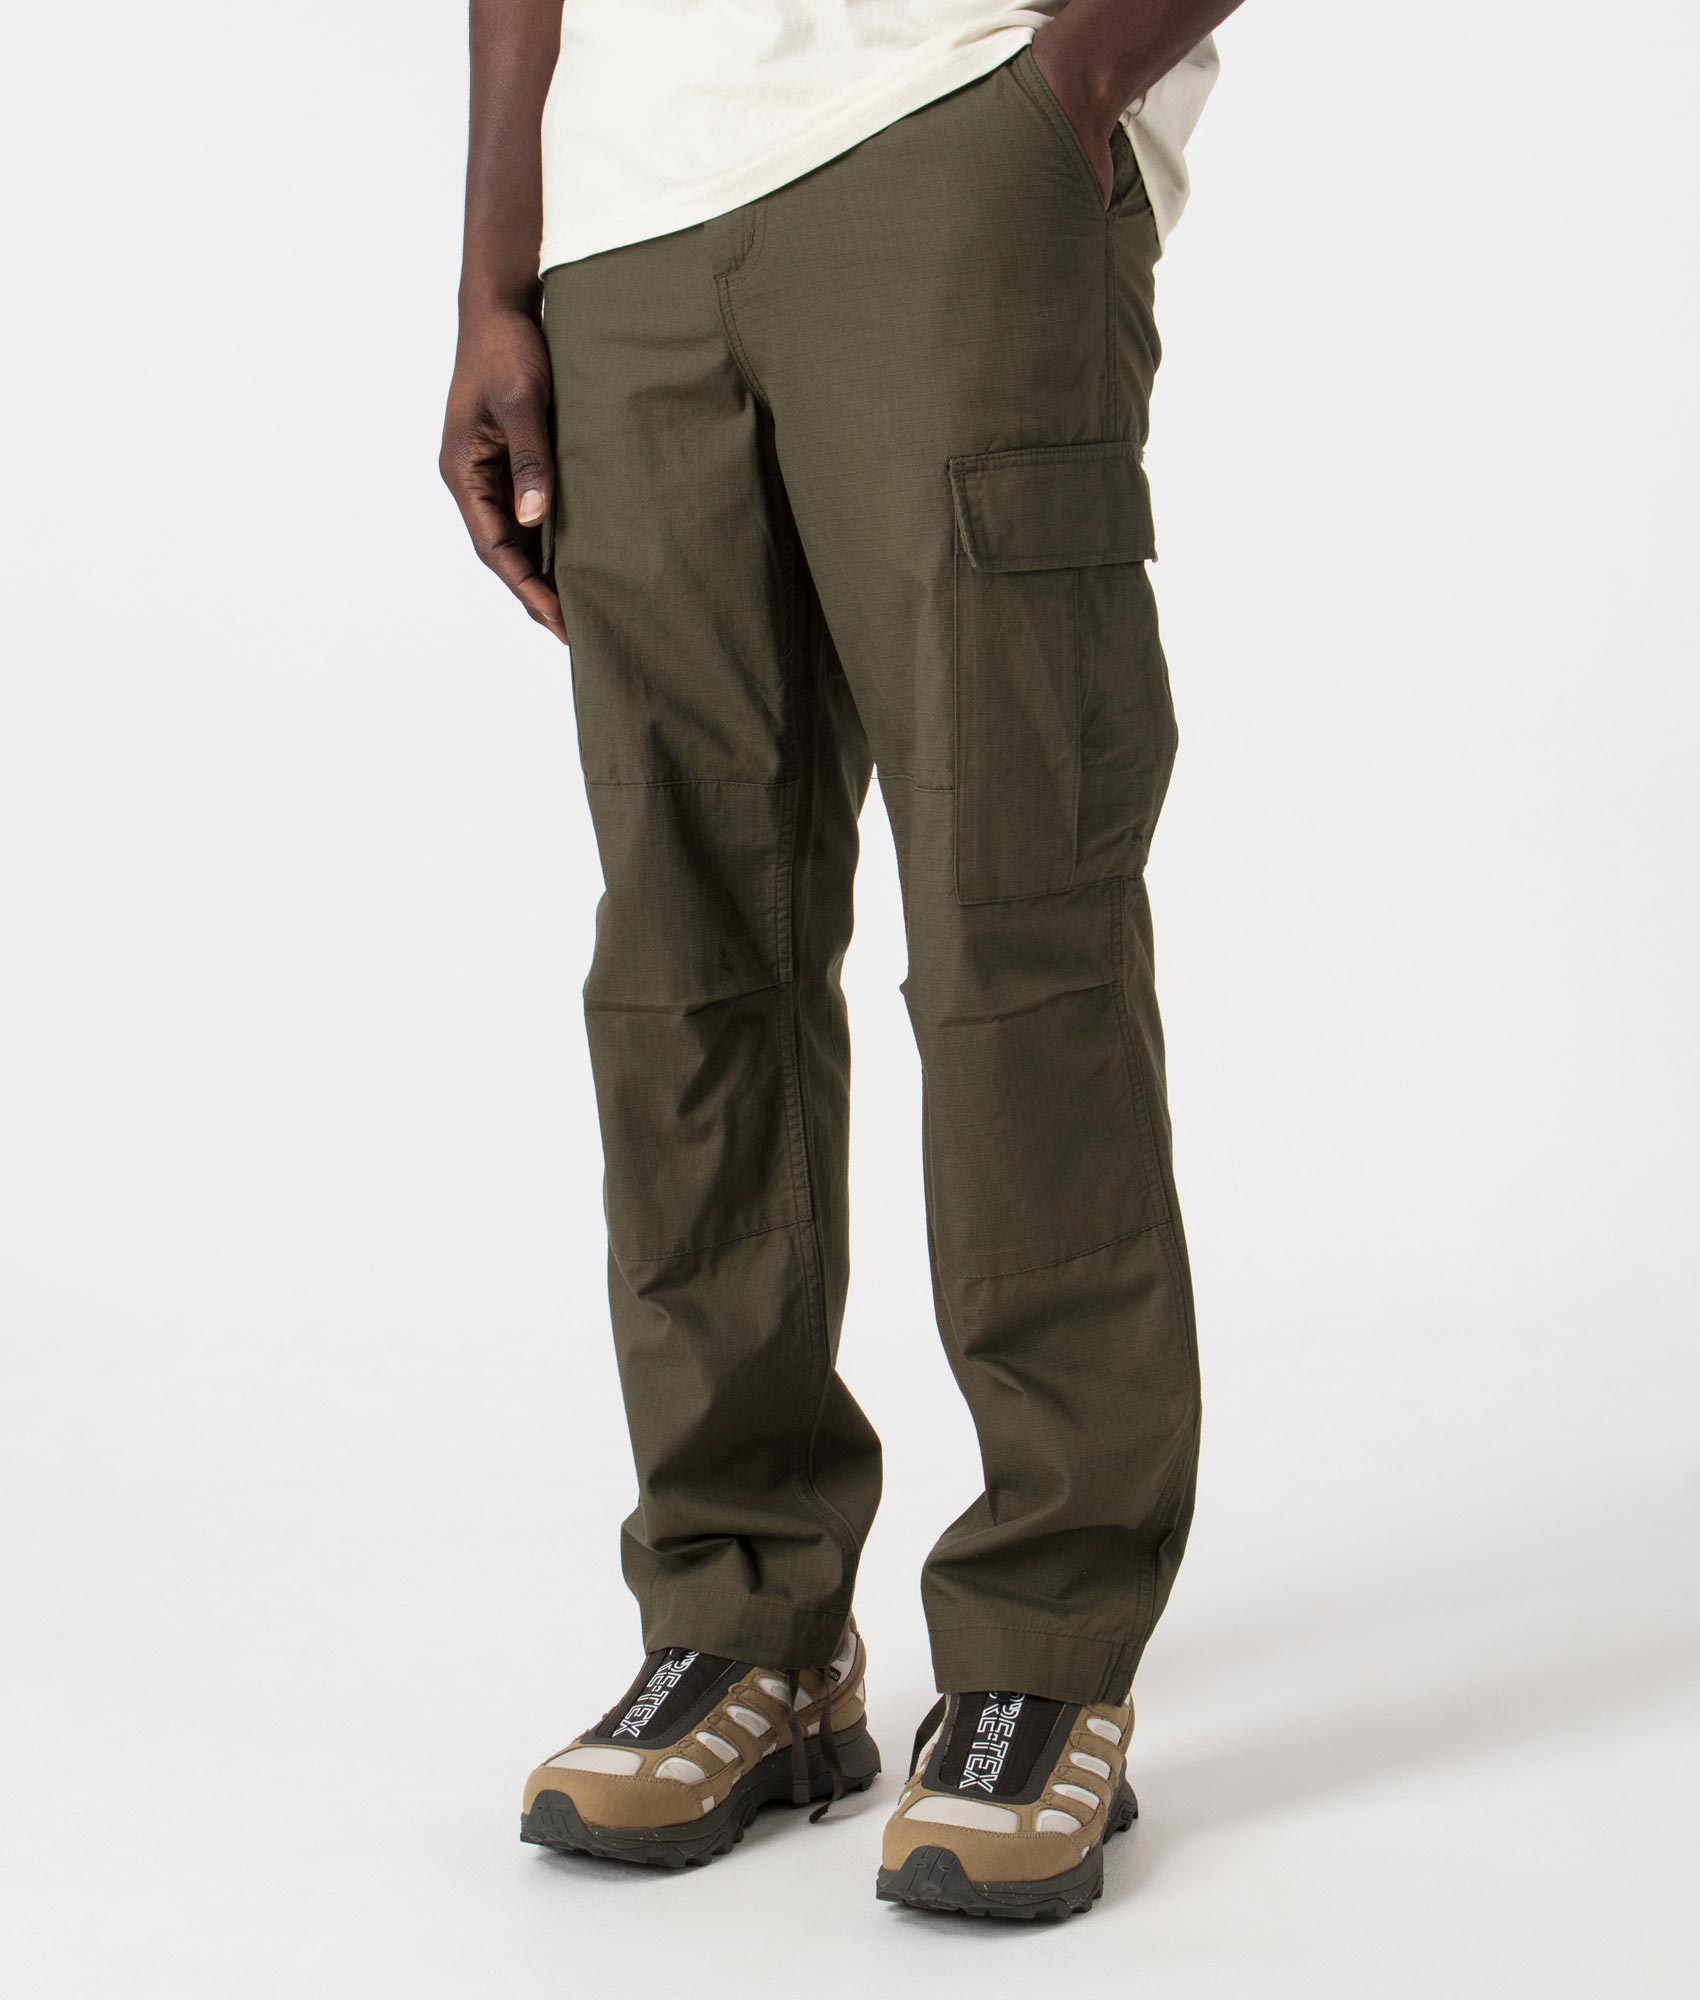 Carhartt WIP Mens Regular Fit Cargo Pants - Colour: 6302 Cypress Rinsed - Size: 34R